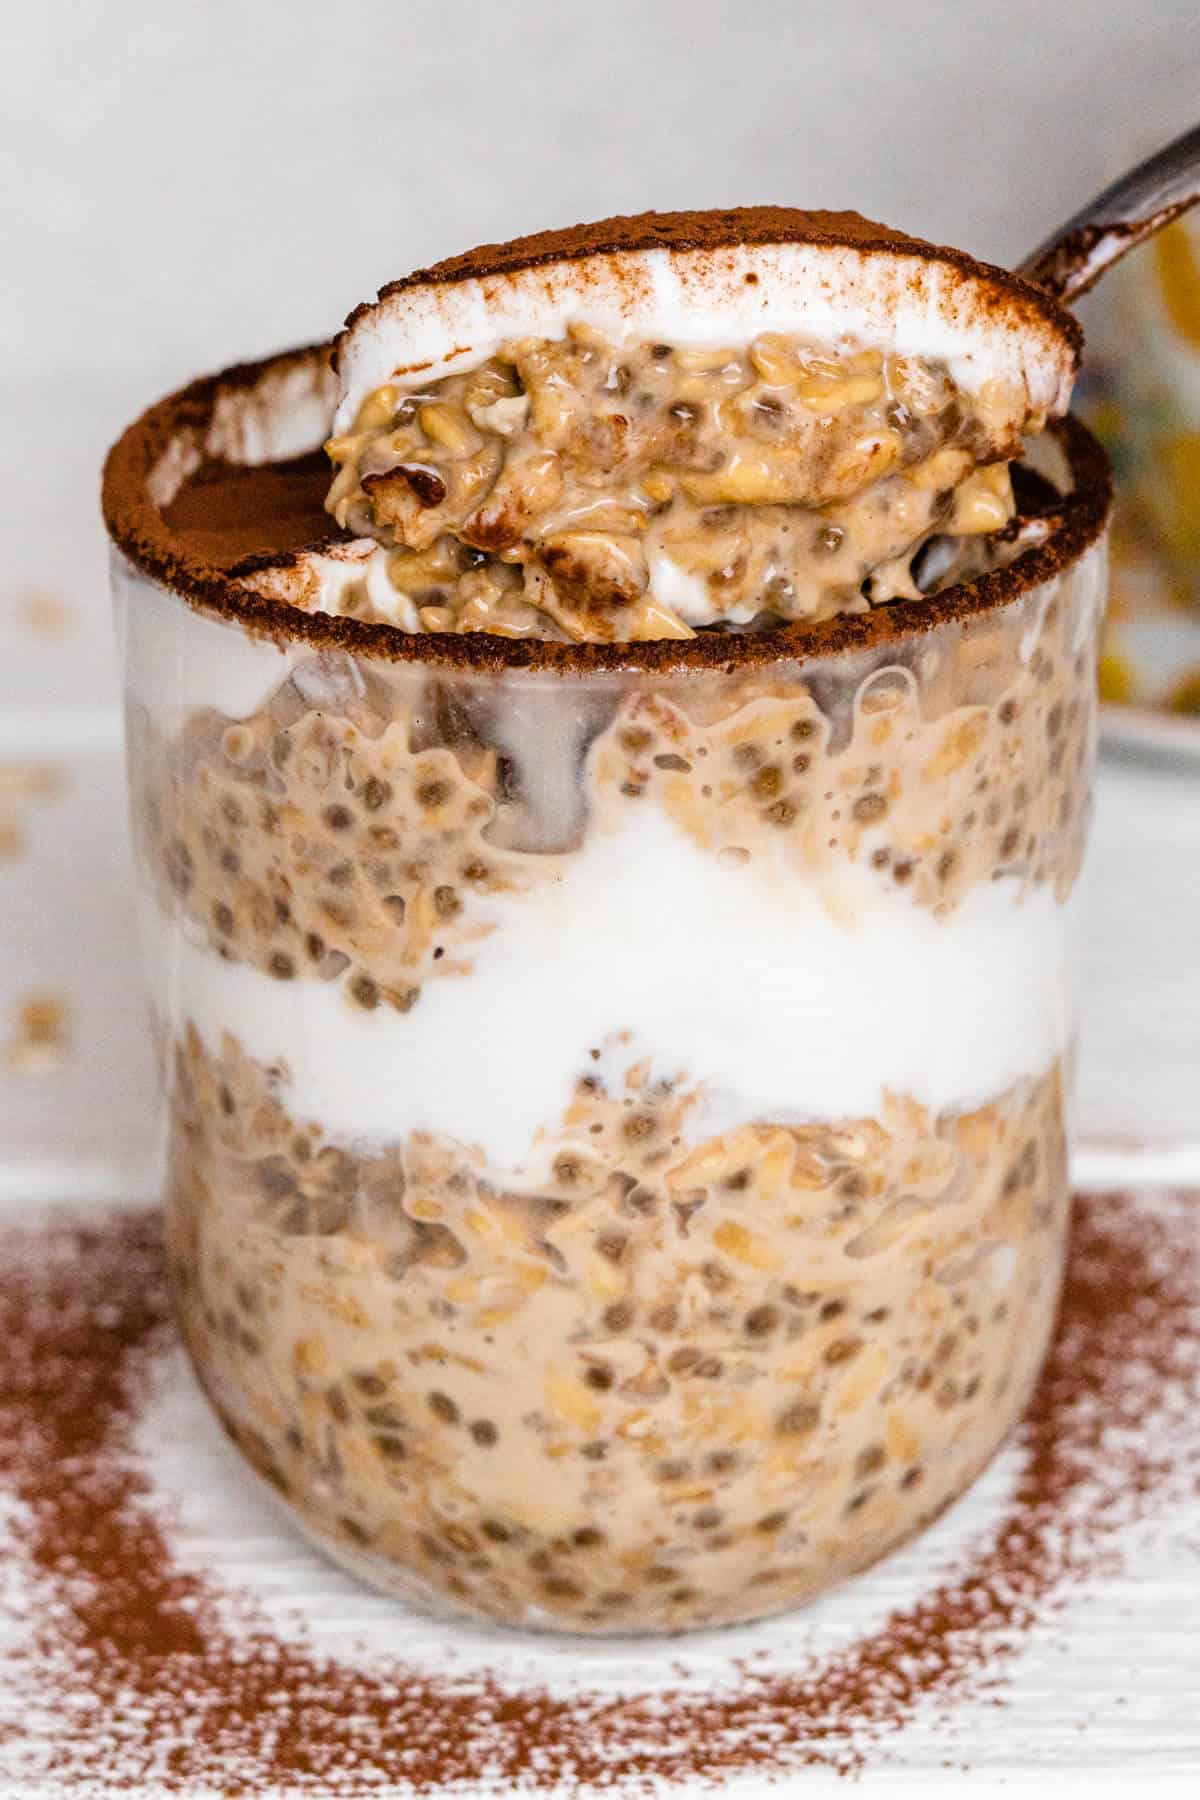 Spoon coming out of the glass of the tiramisu oats